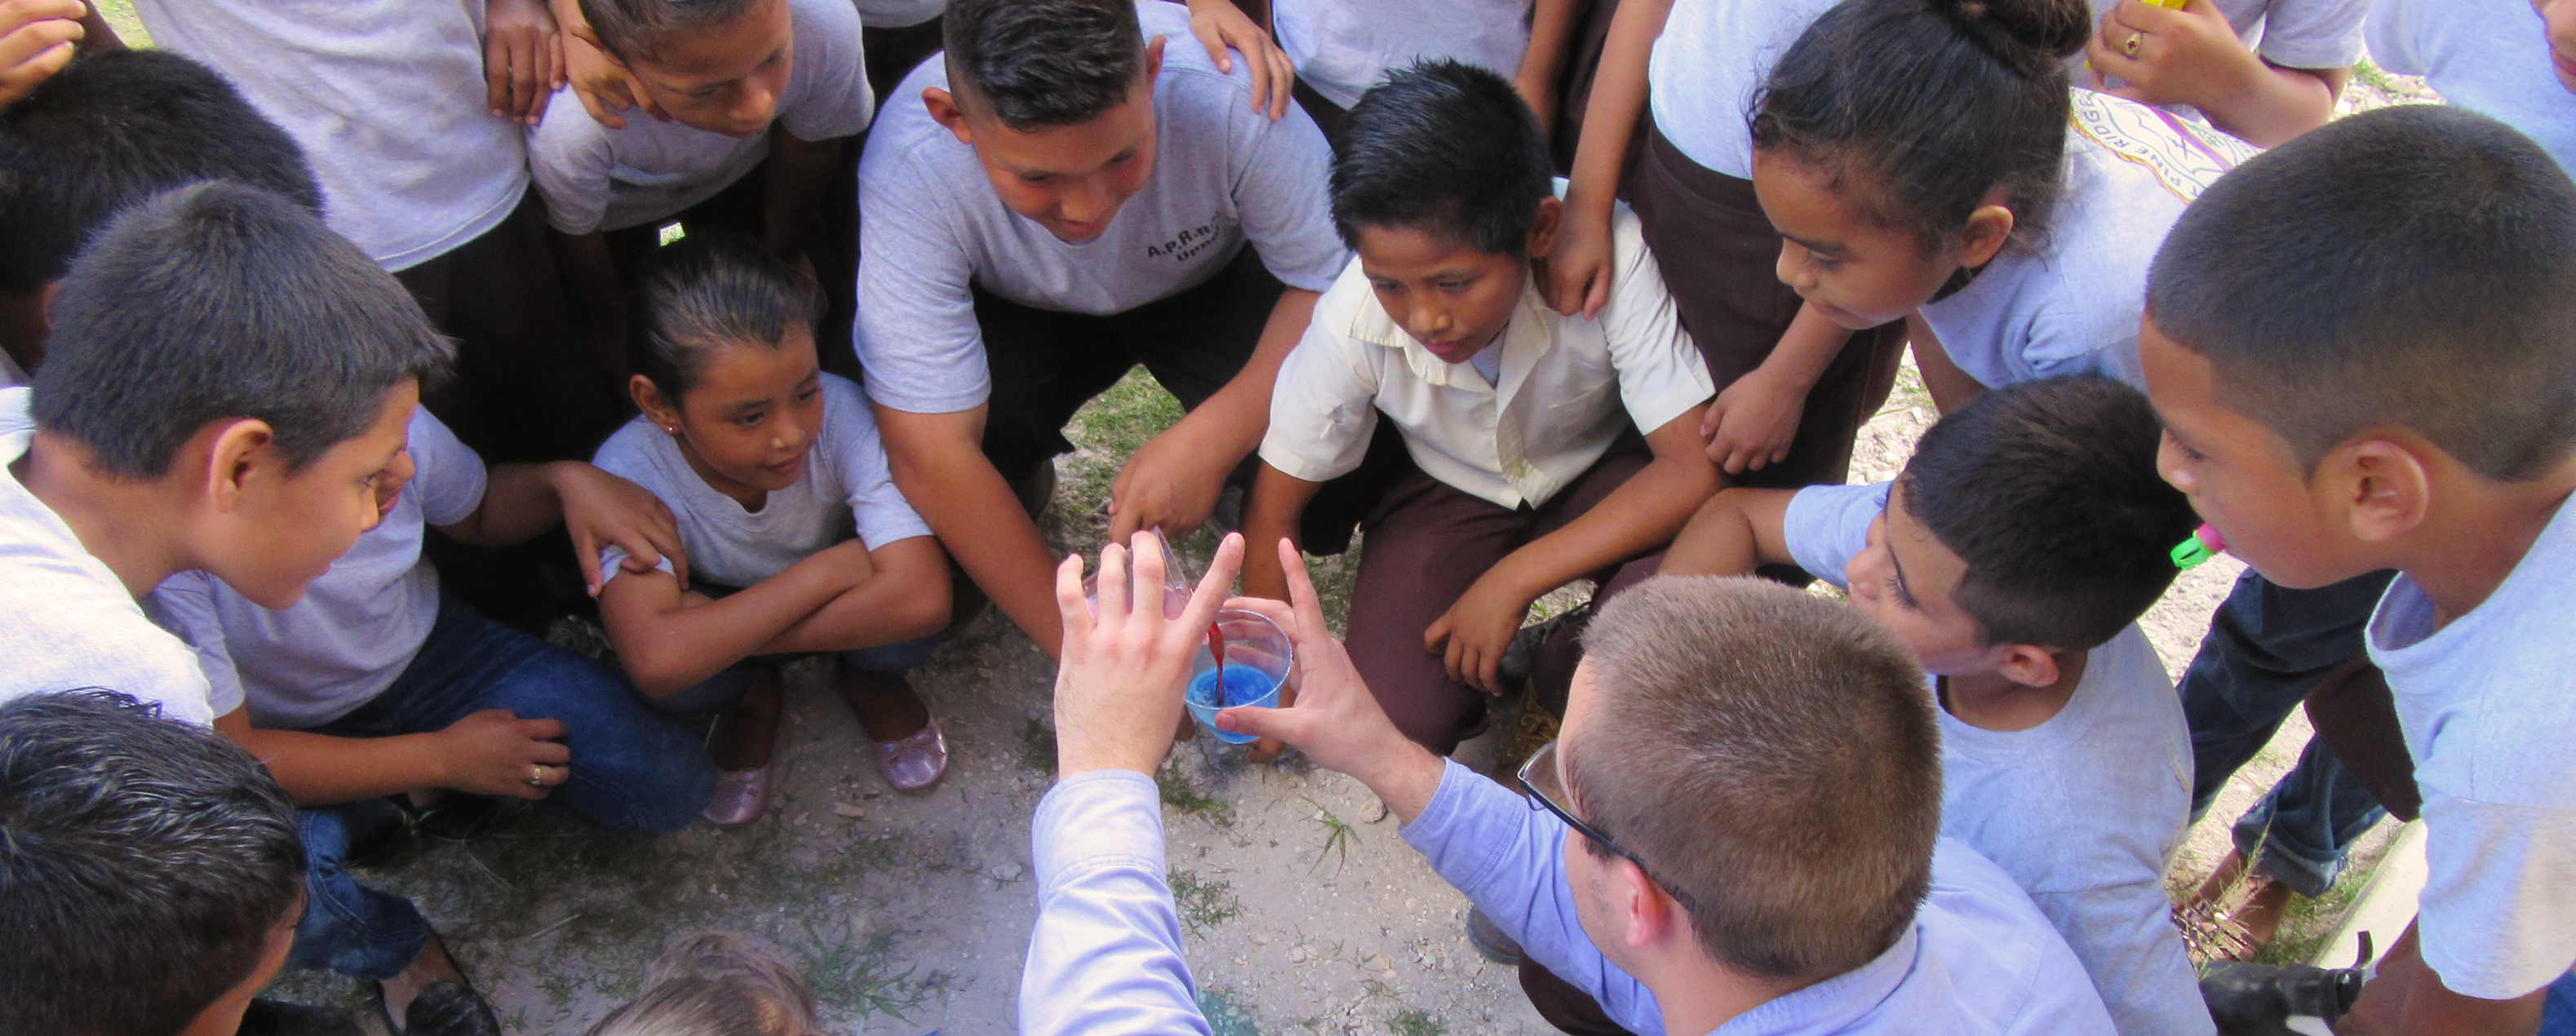 14 kids of varying ages gathered in a circle around a young man who is holding a cup filled with blue liquid.